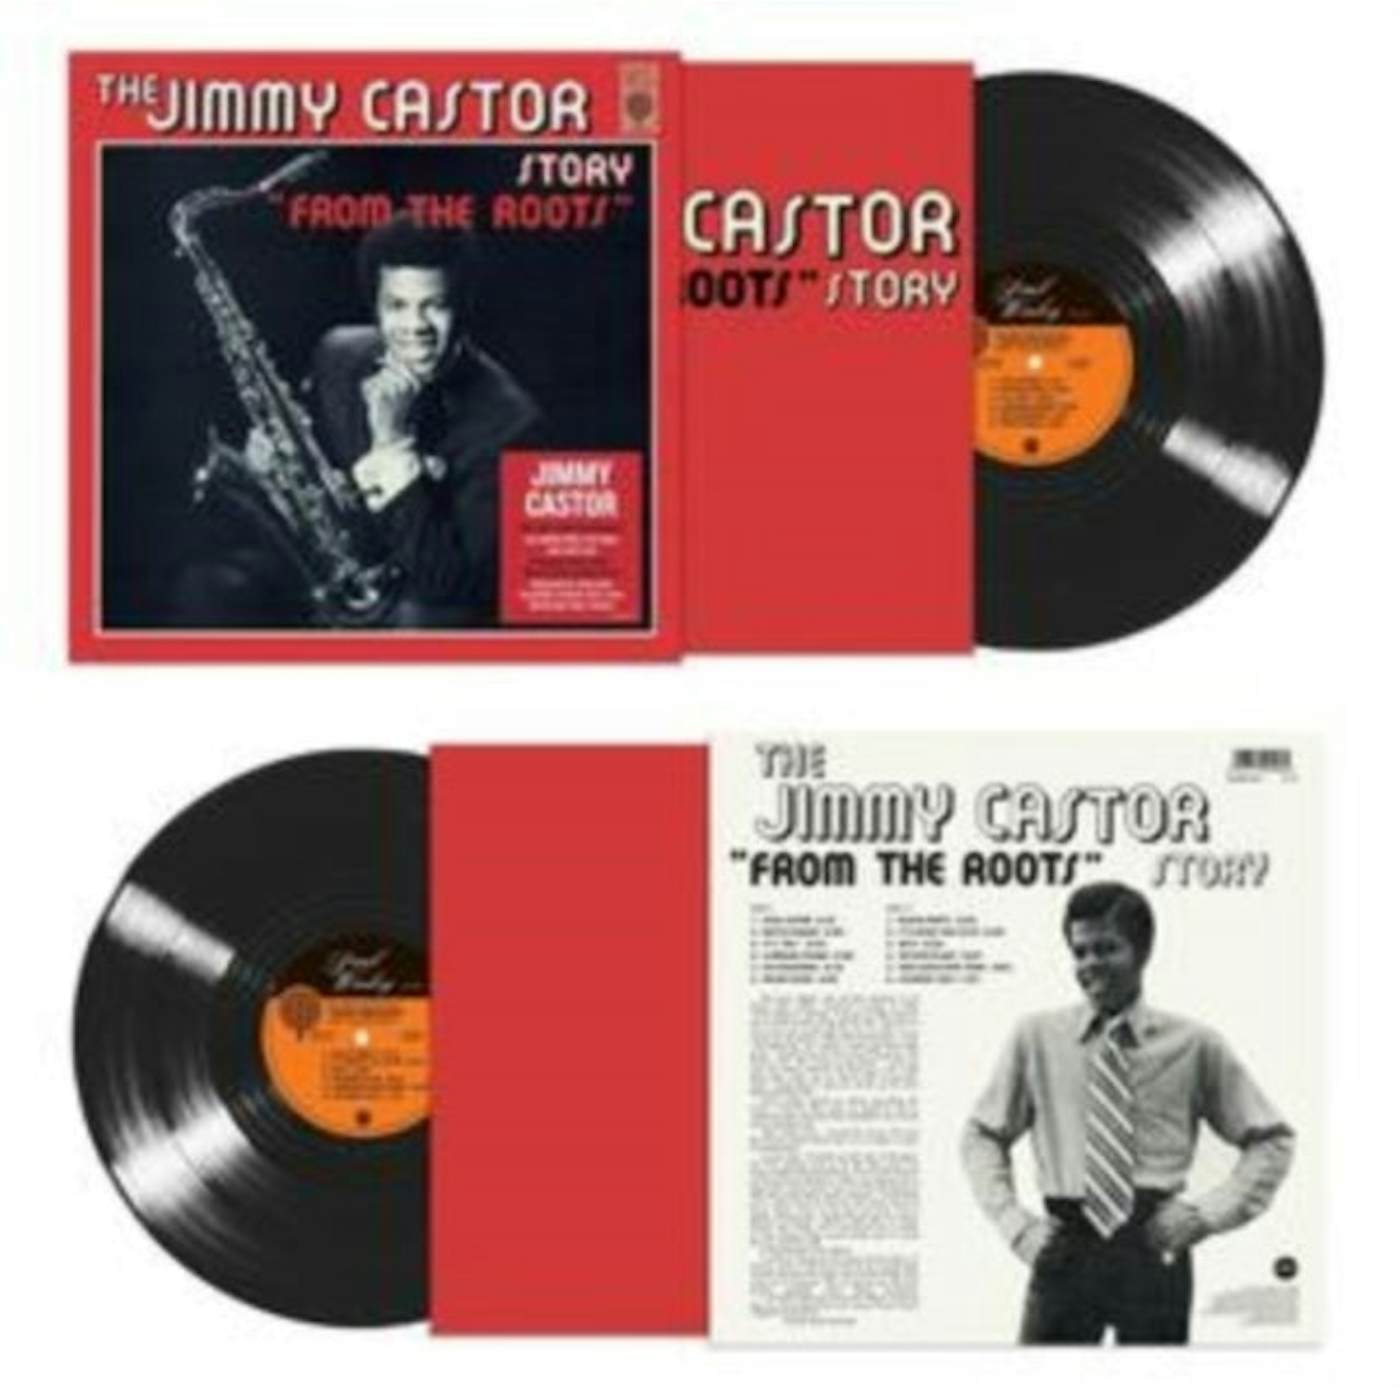 Jimmy Castor LP Vinyl Record - From The Roots